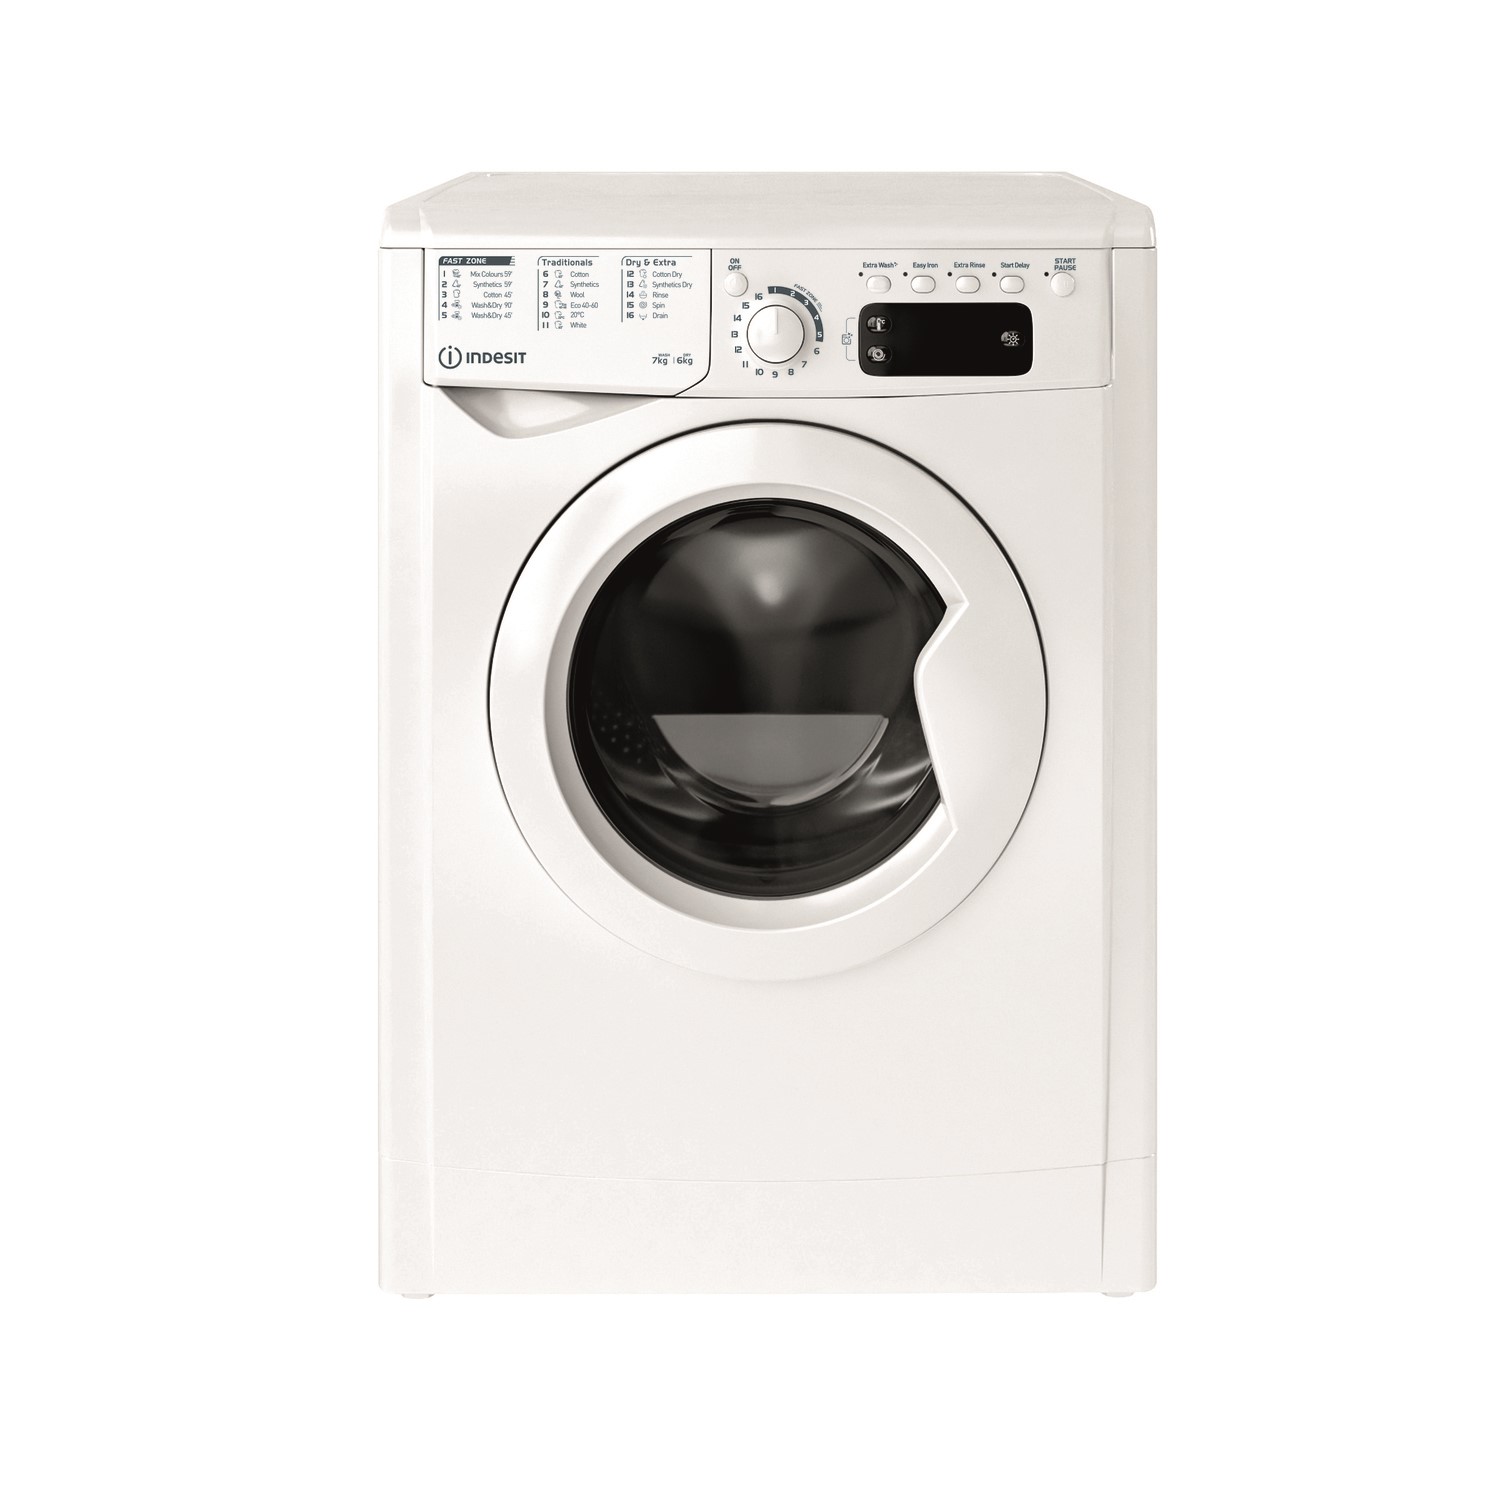 Photos - Other for Computer Indesit 7kg Wash 6kg Dry 1400rpm Washer Dryer - White 869991668710 